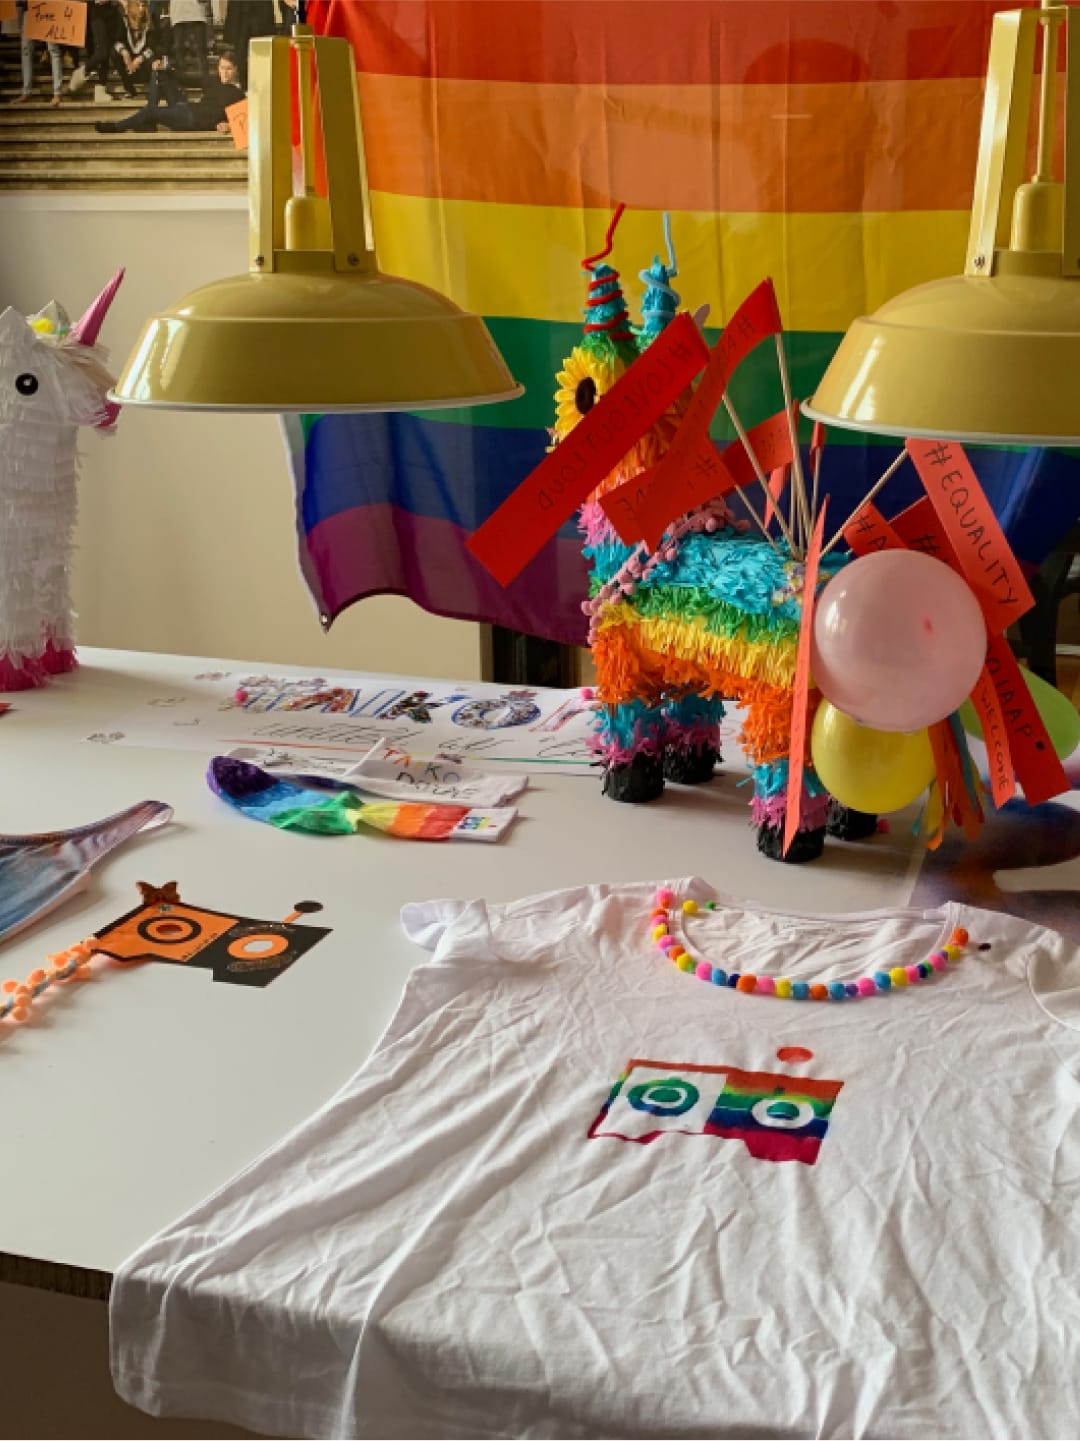 A table with an LGBTQ+ rainbow flag, balloons, a colorful pinata and colorful painted shirts.